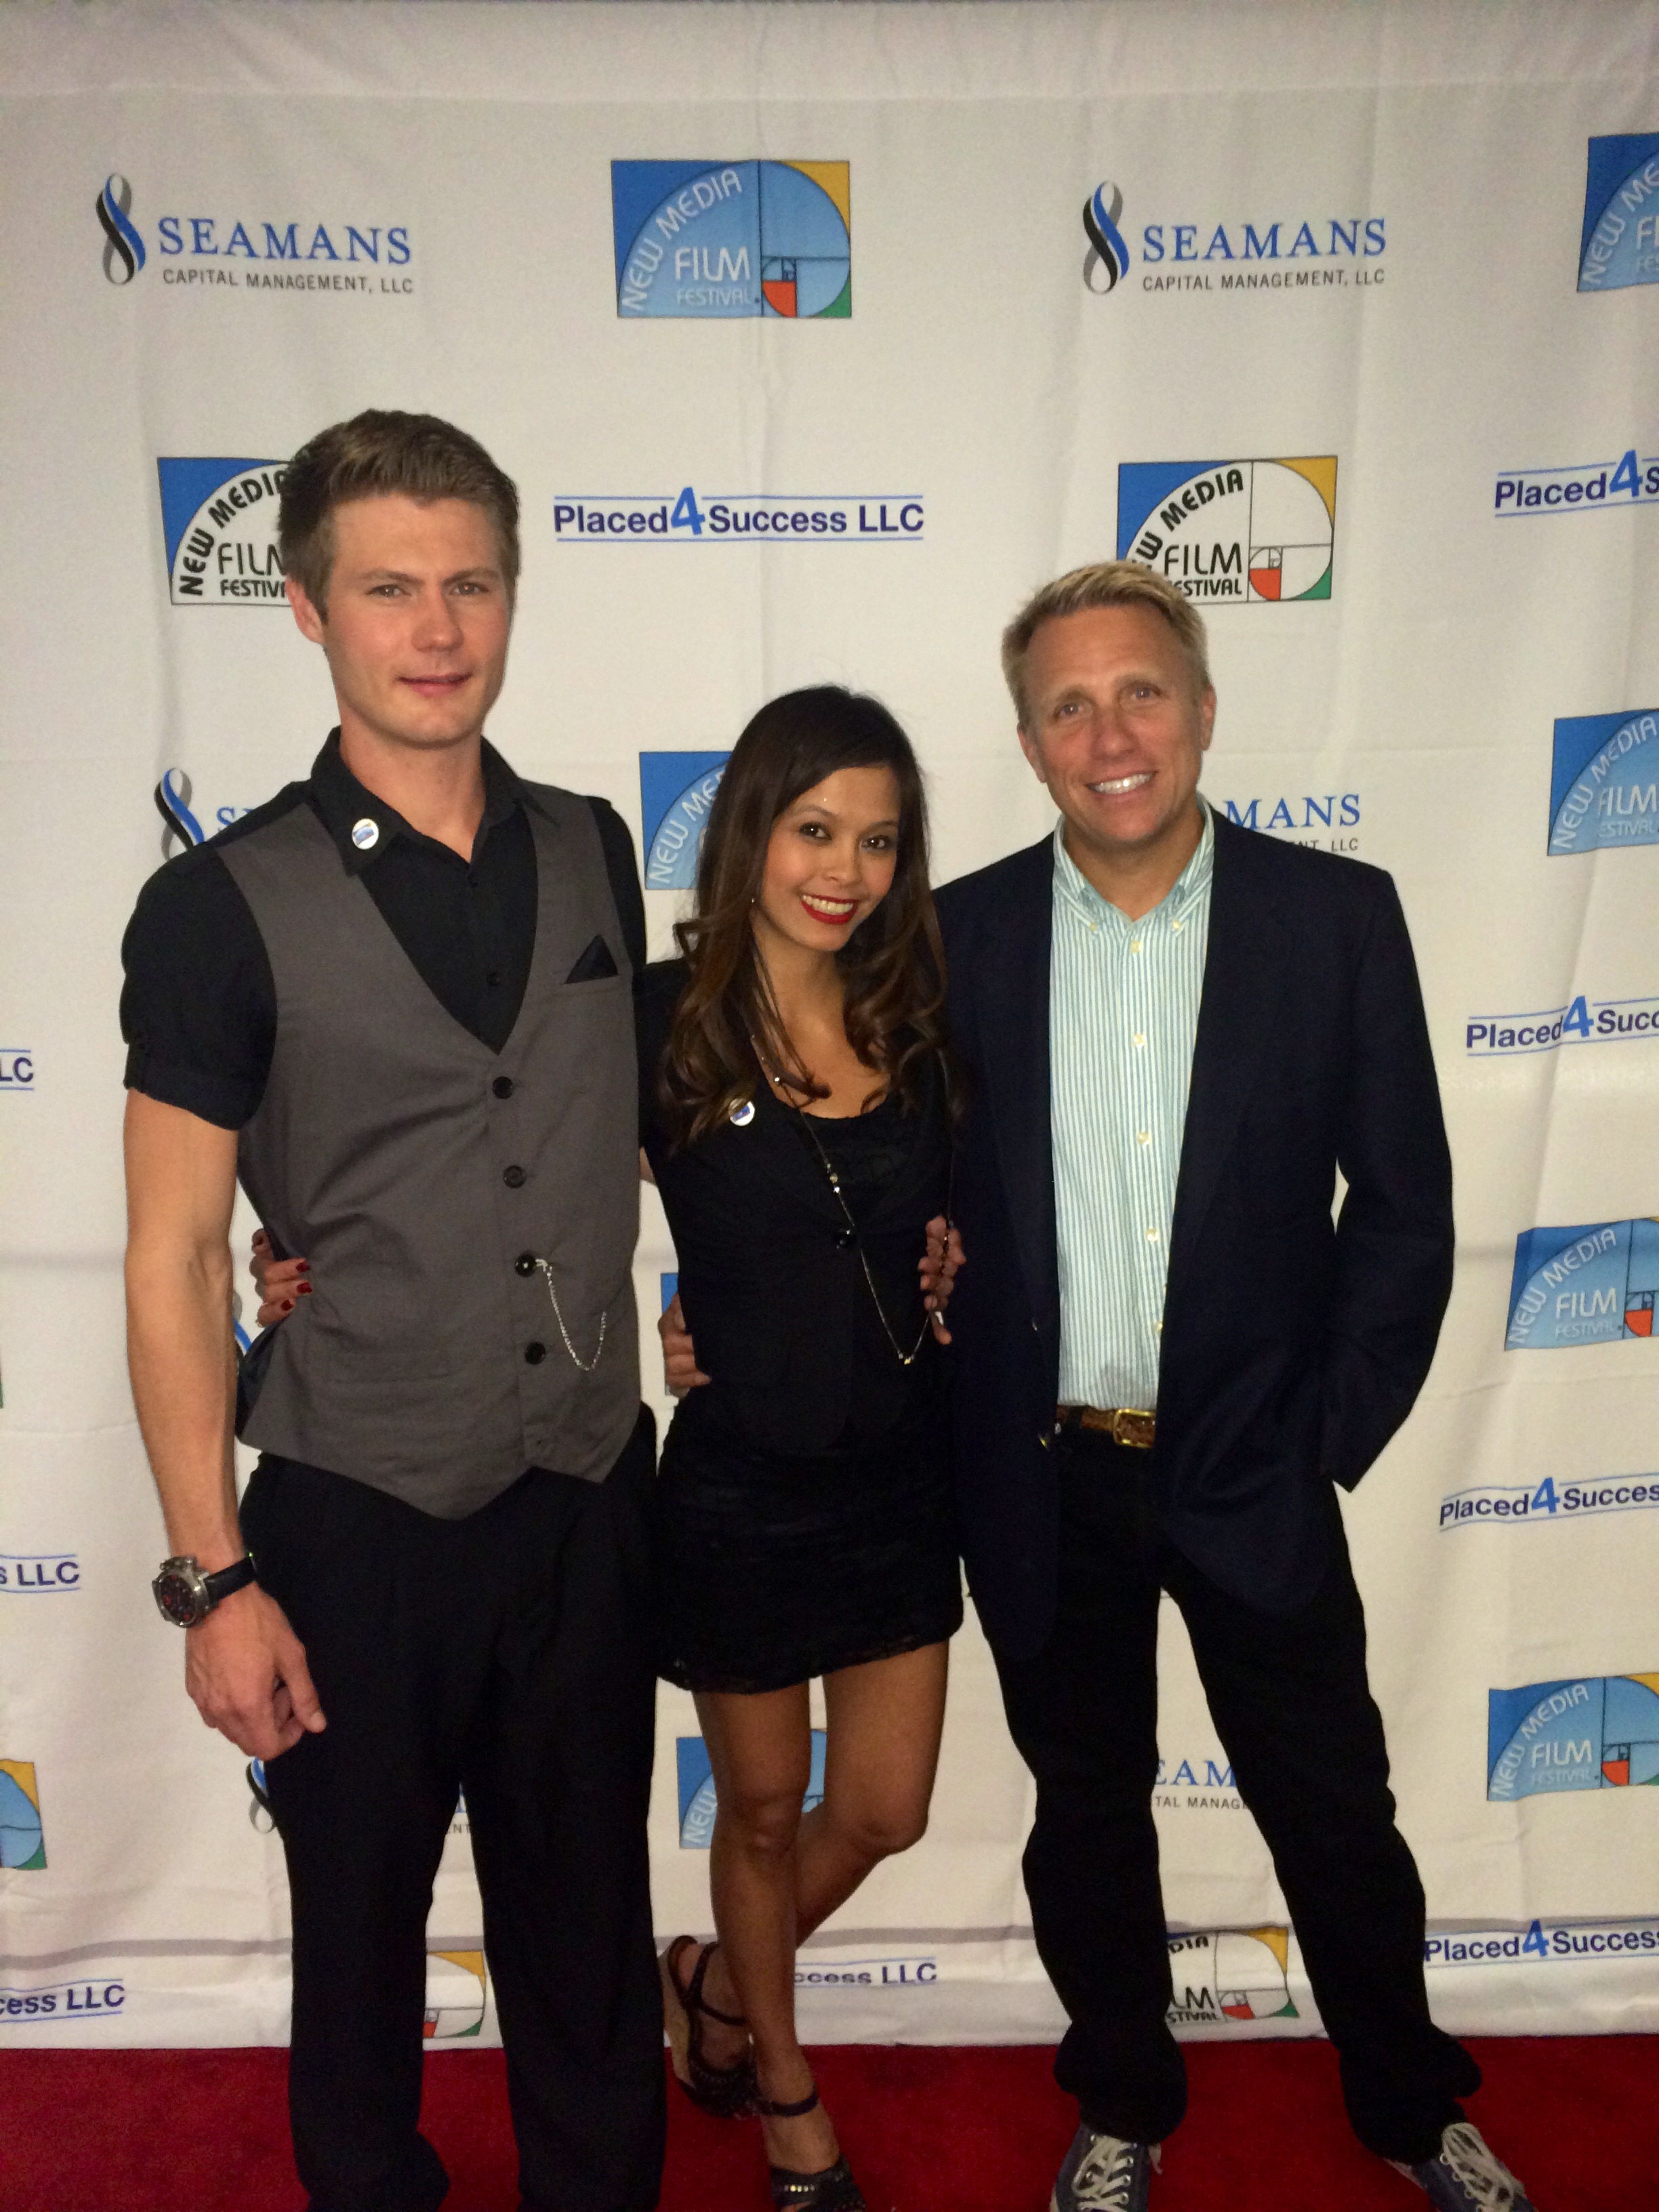 On the red carpet at the New Media Film Festival 2014.